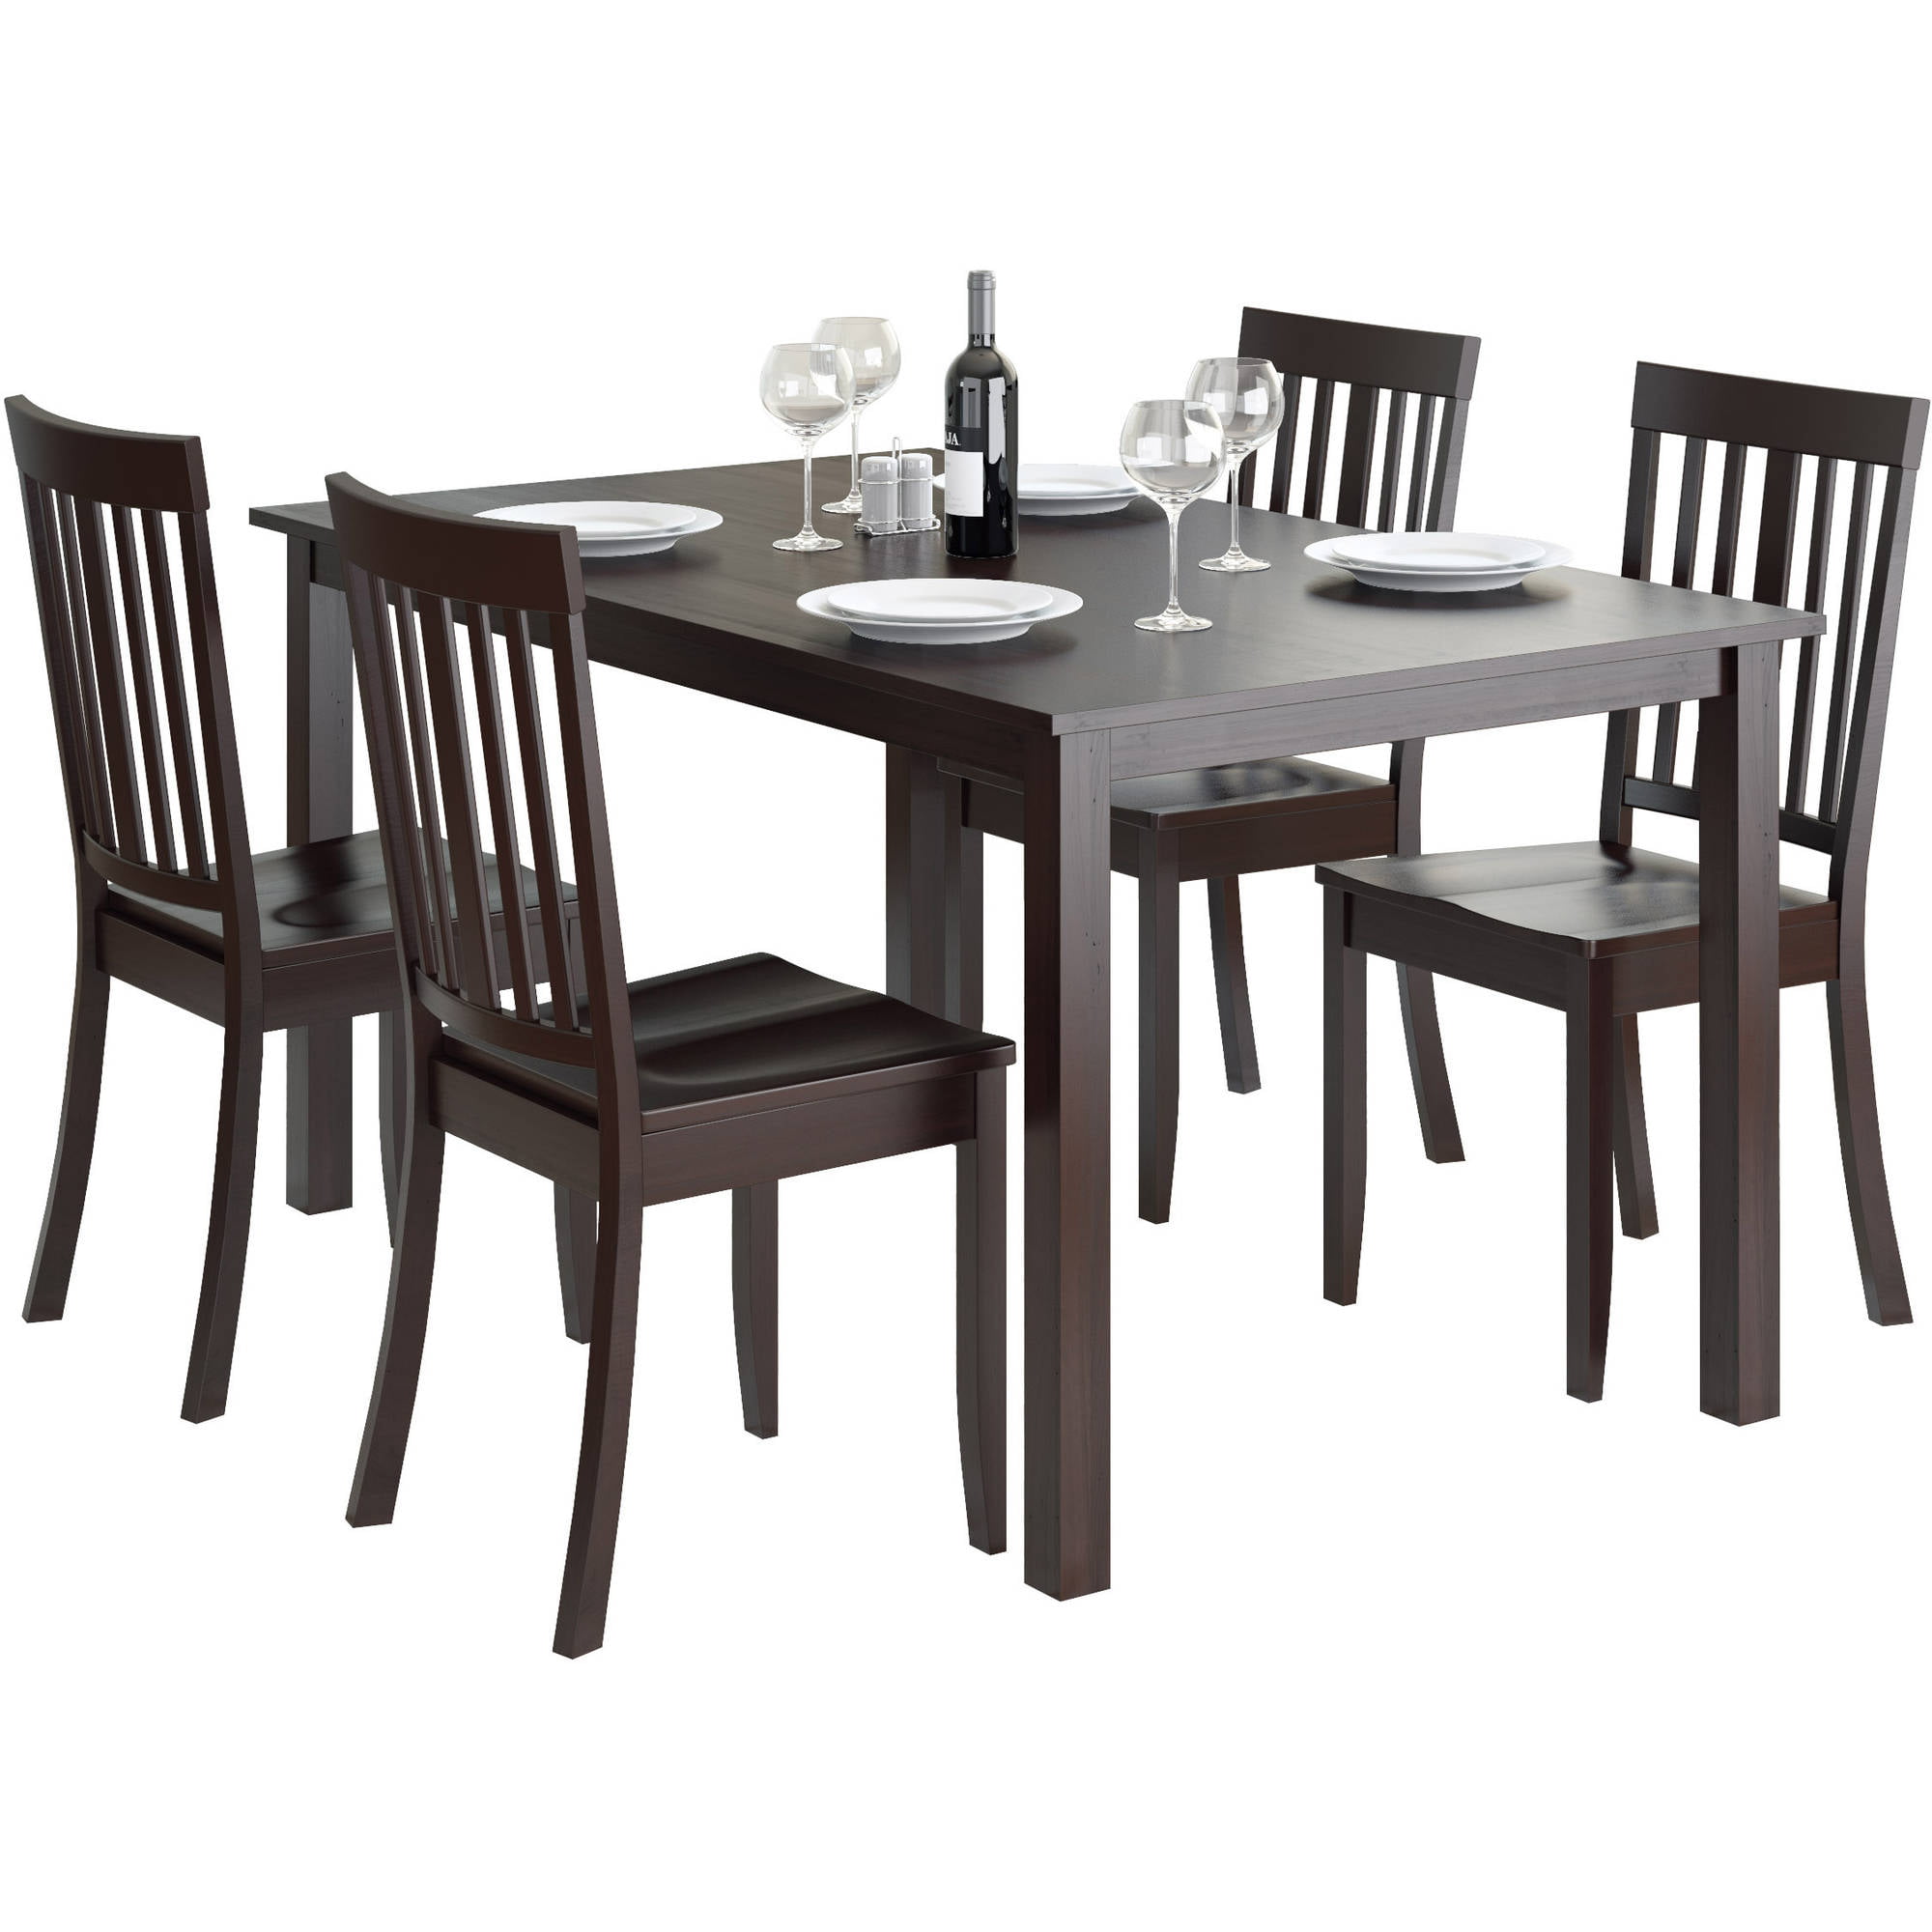 Cappuccino CorLiving Atwood Dining chairs 